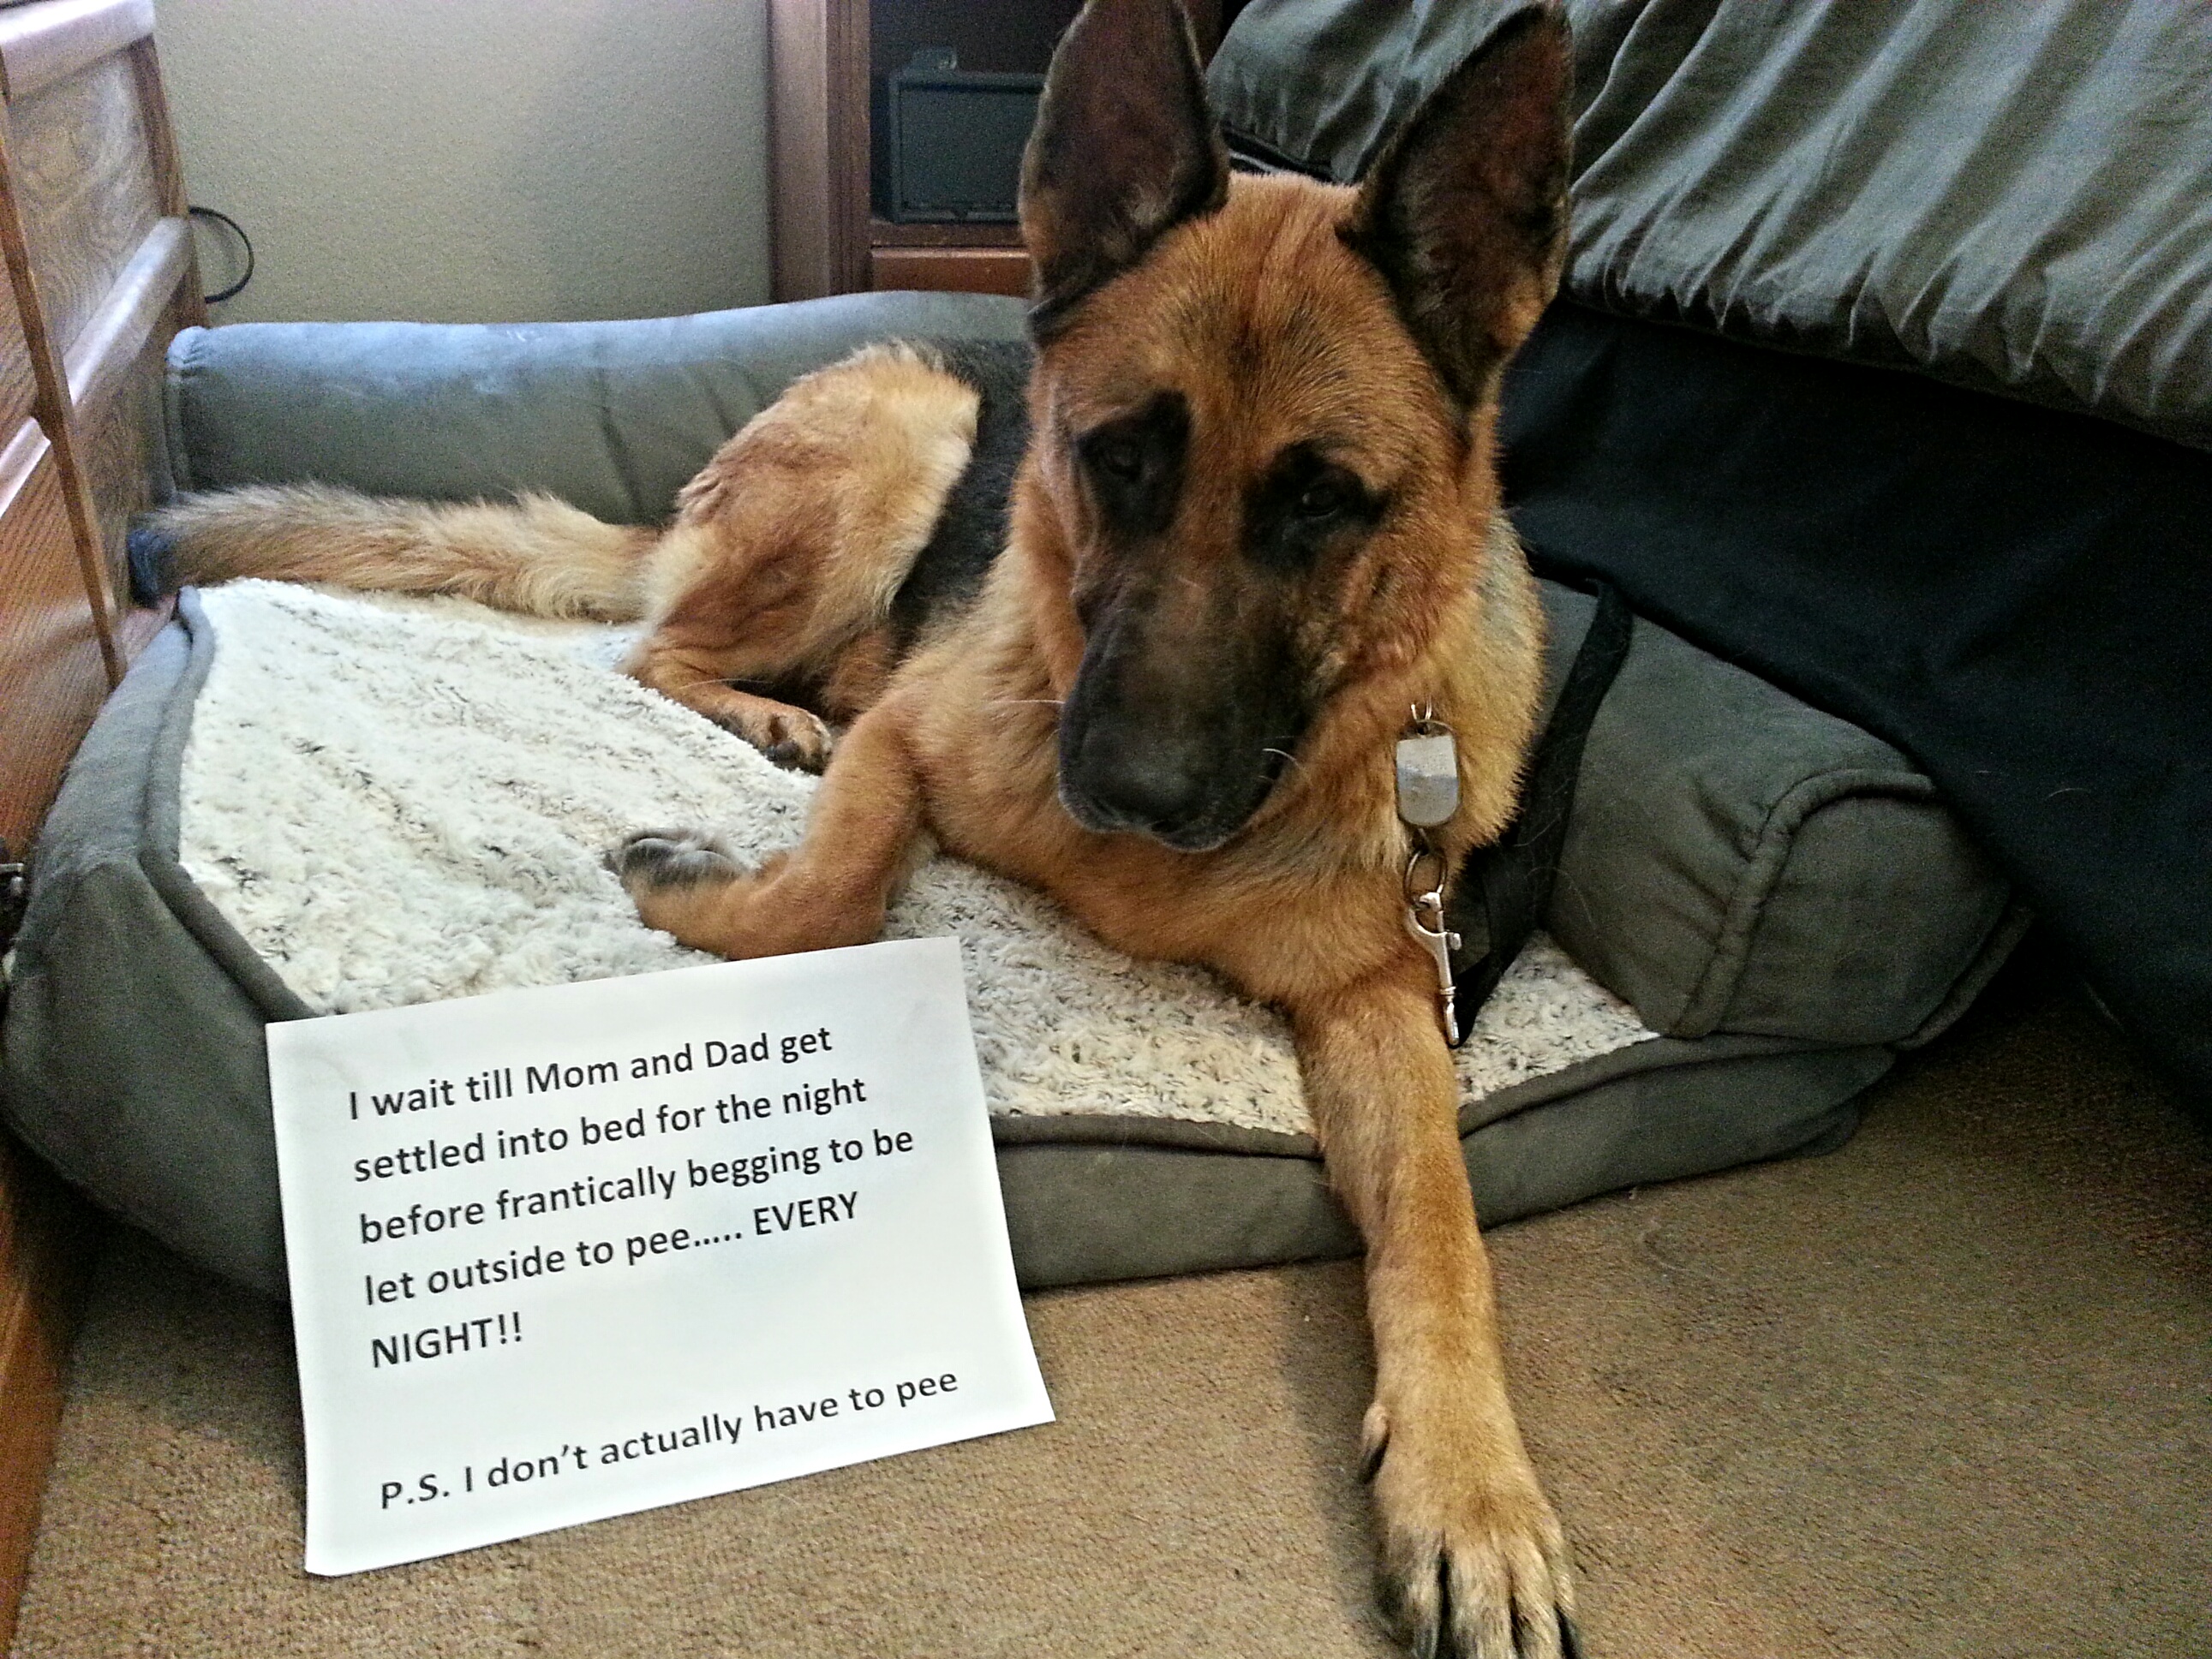 German Shepherd on its bed with a note 